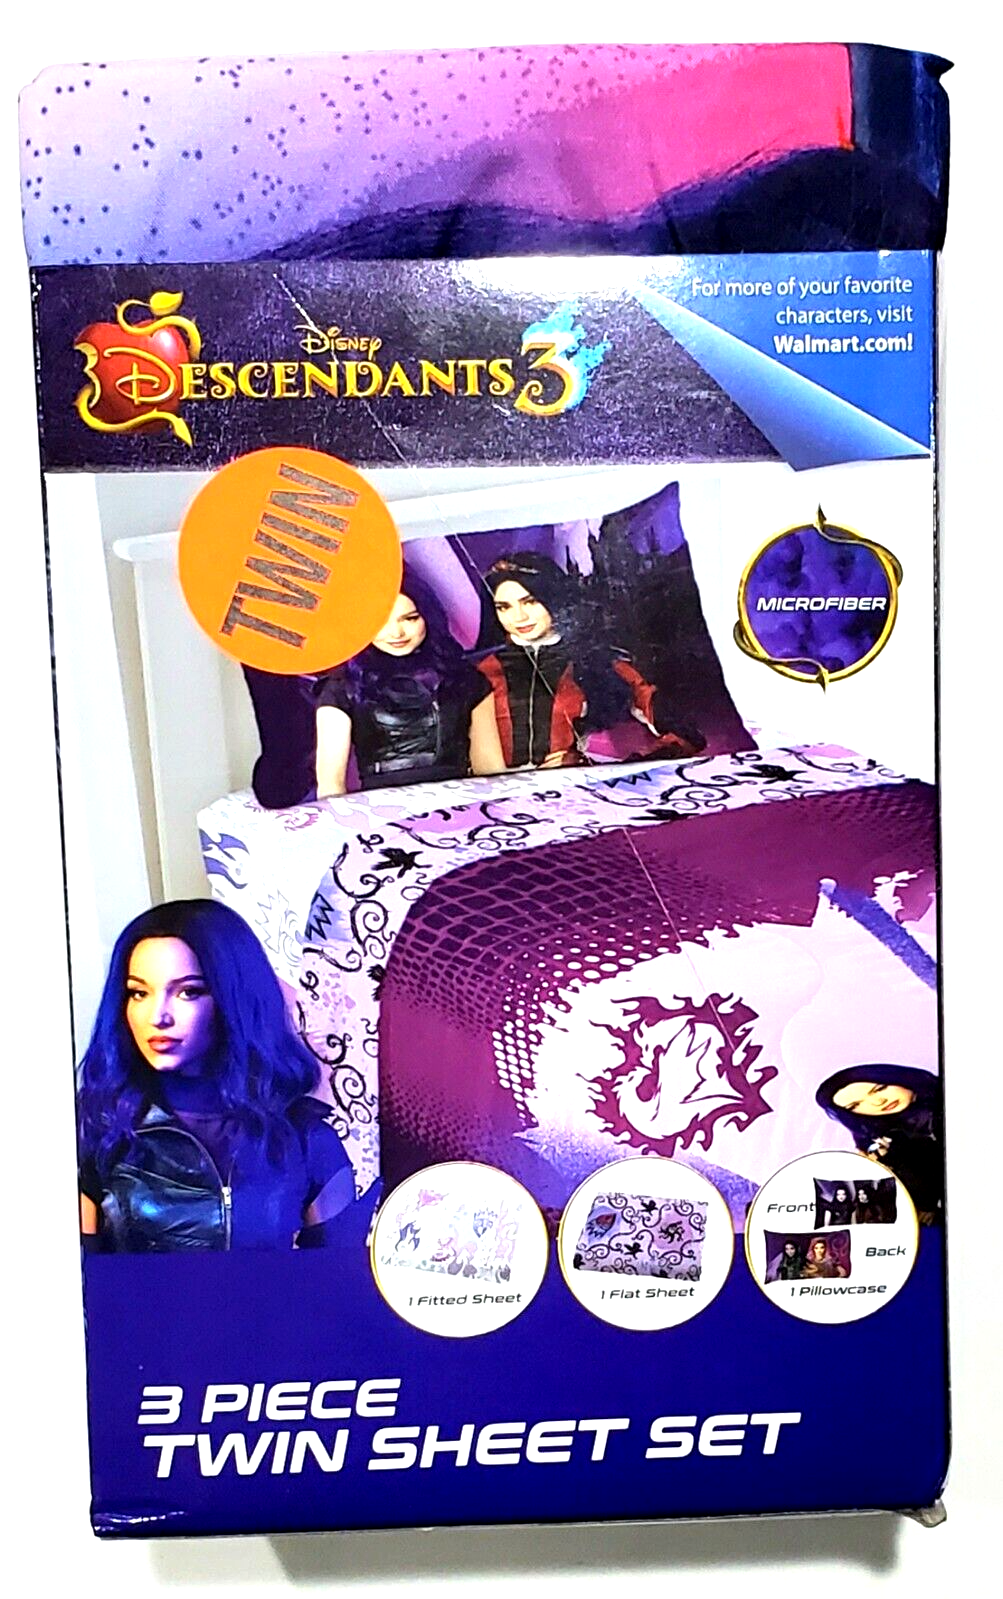 Primary image for Disney Descendants 3 3-Piece Twin Sheet Set Microfiber Fitted Flat And P Case